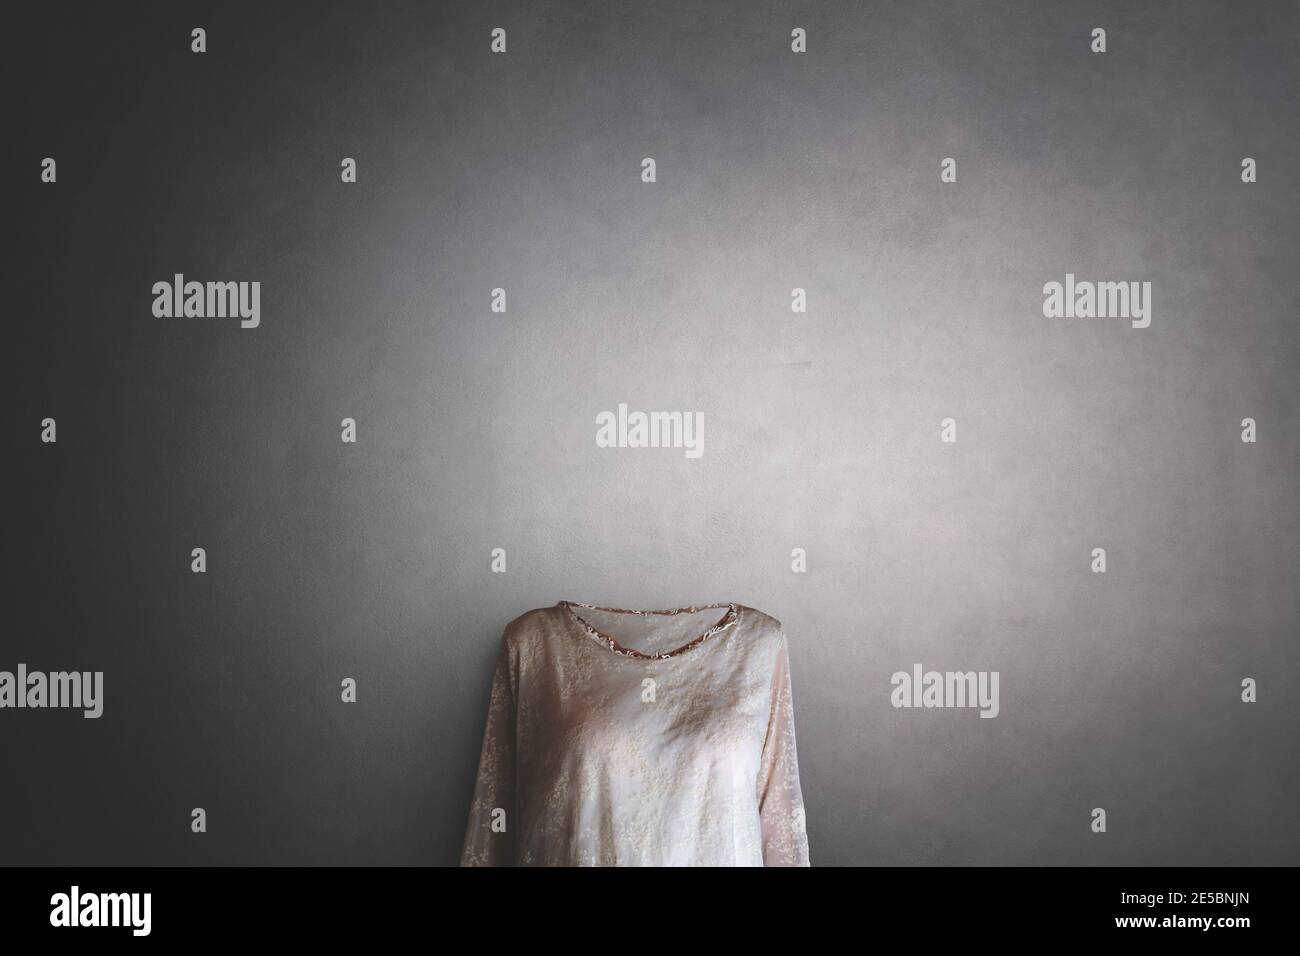 invisible woman with no face wearing a blouse, concept of losing identity Stock Photo